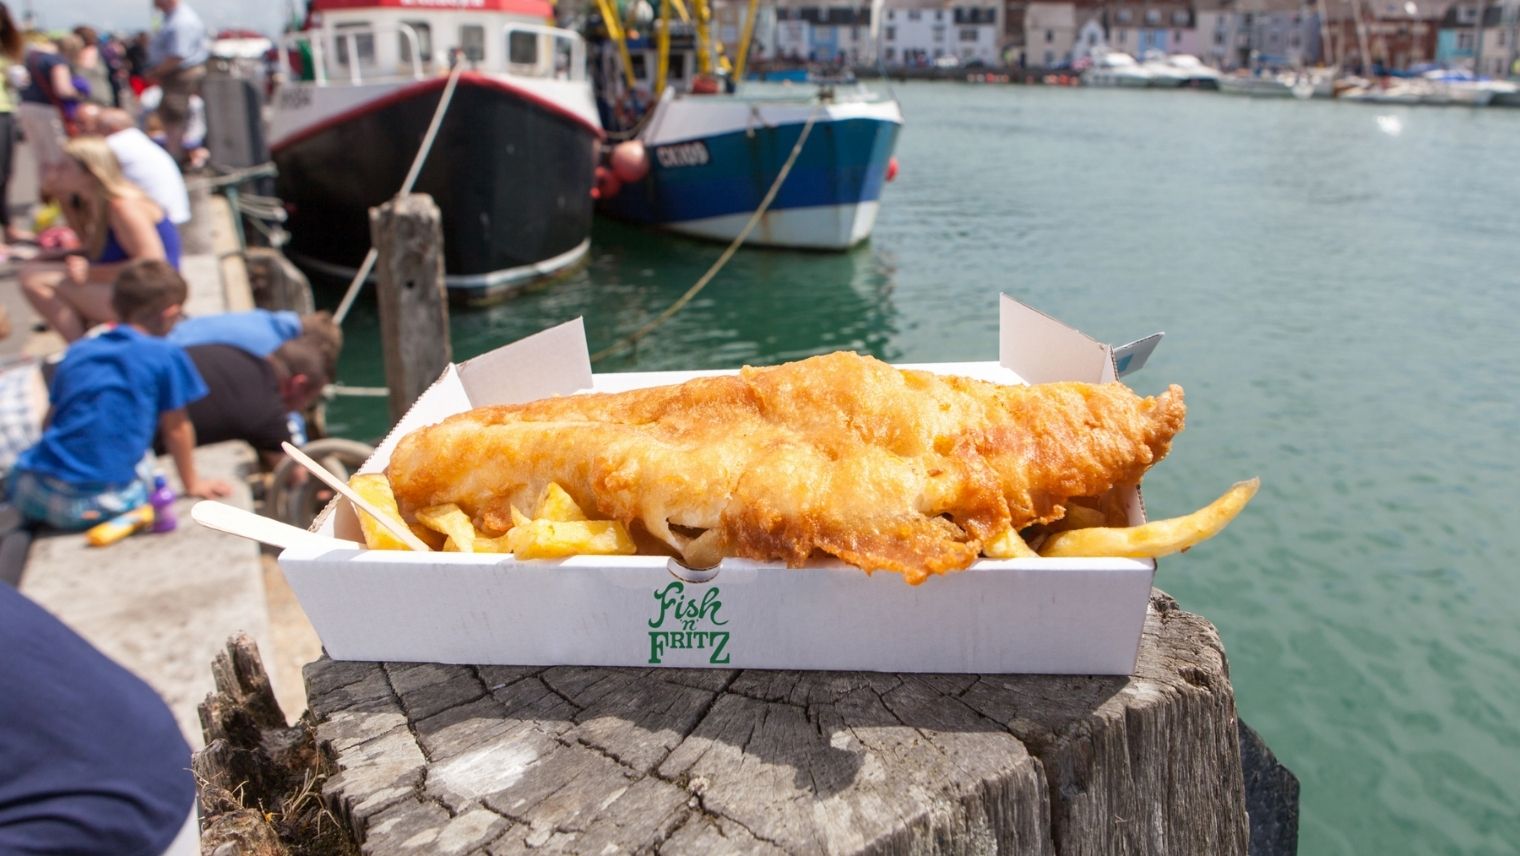 Fish and chips served by Fish 'n' Fritz seen on Weymouth seafront